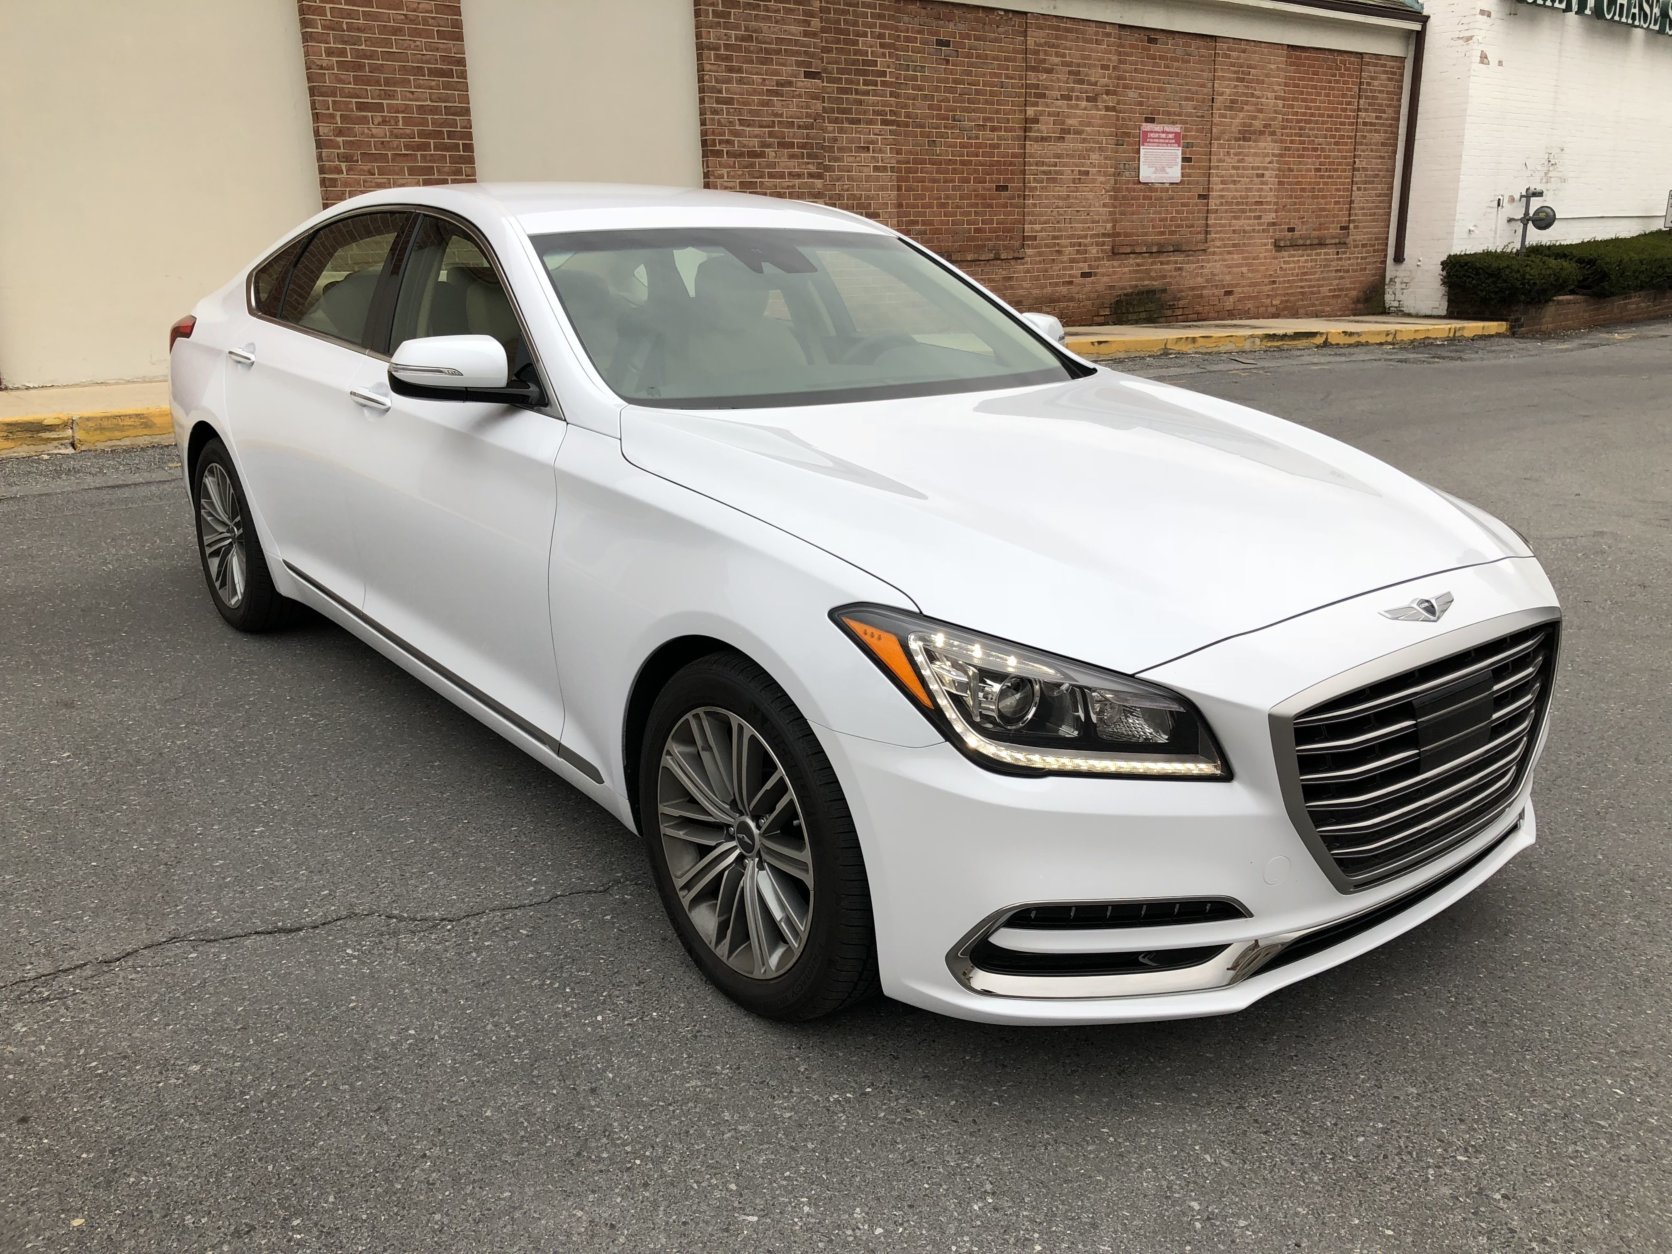 On the new Genesis G80, its 18-inch wheels look a bit out of place. (WTOP/Mike Parrish)